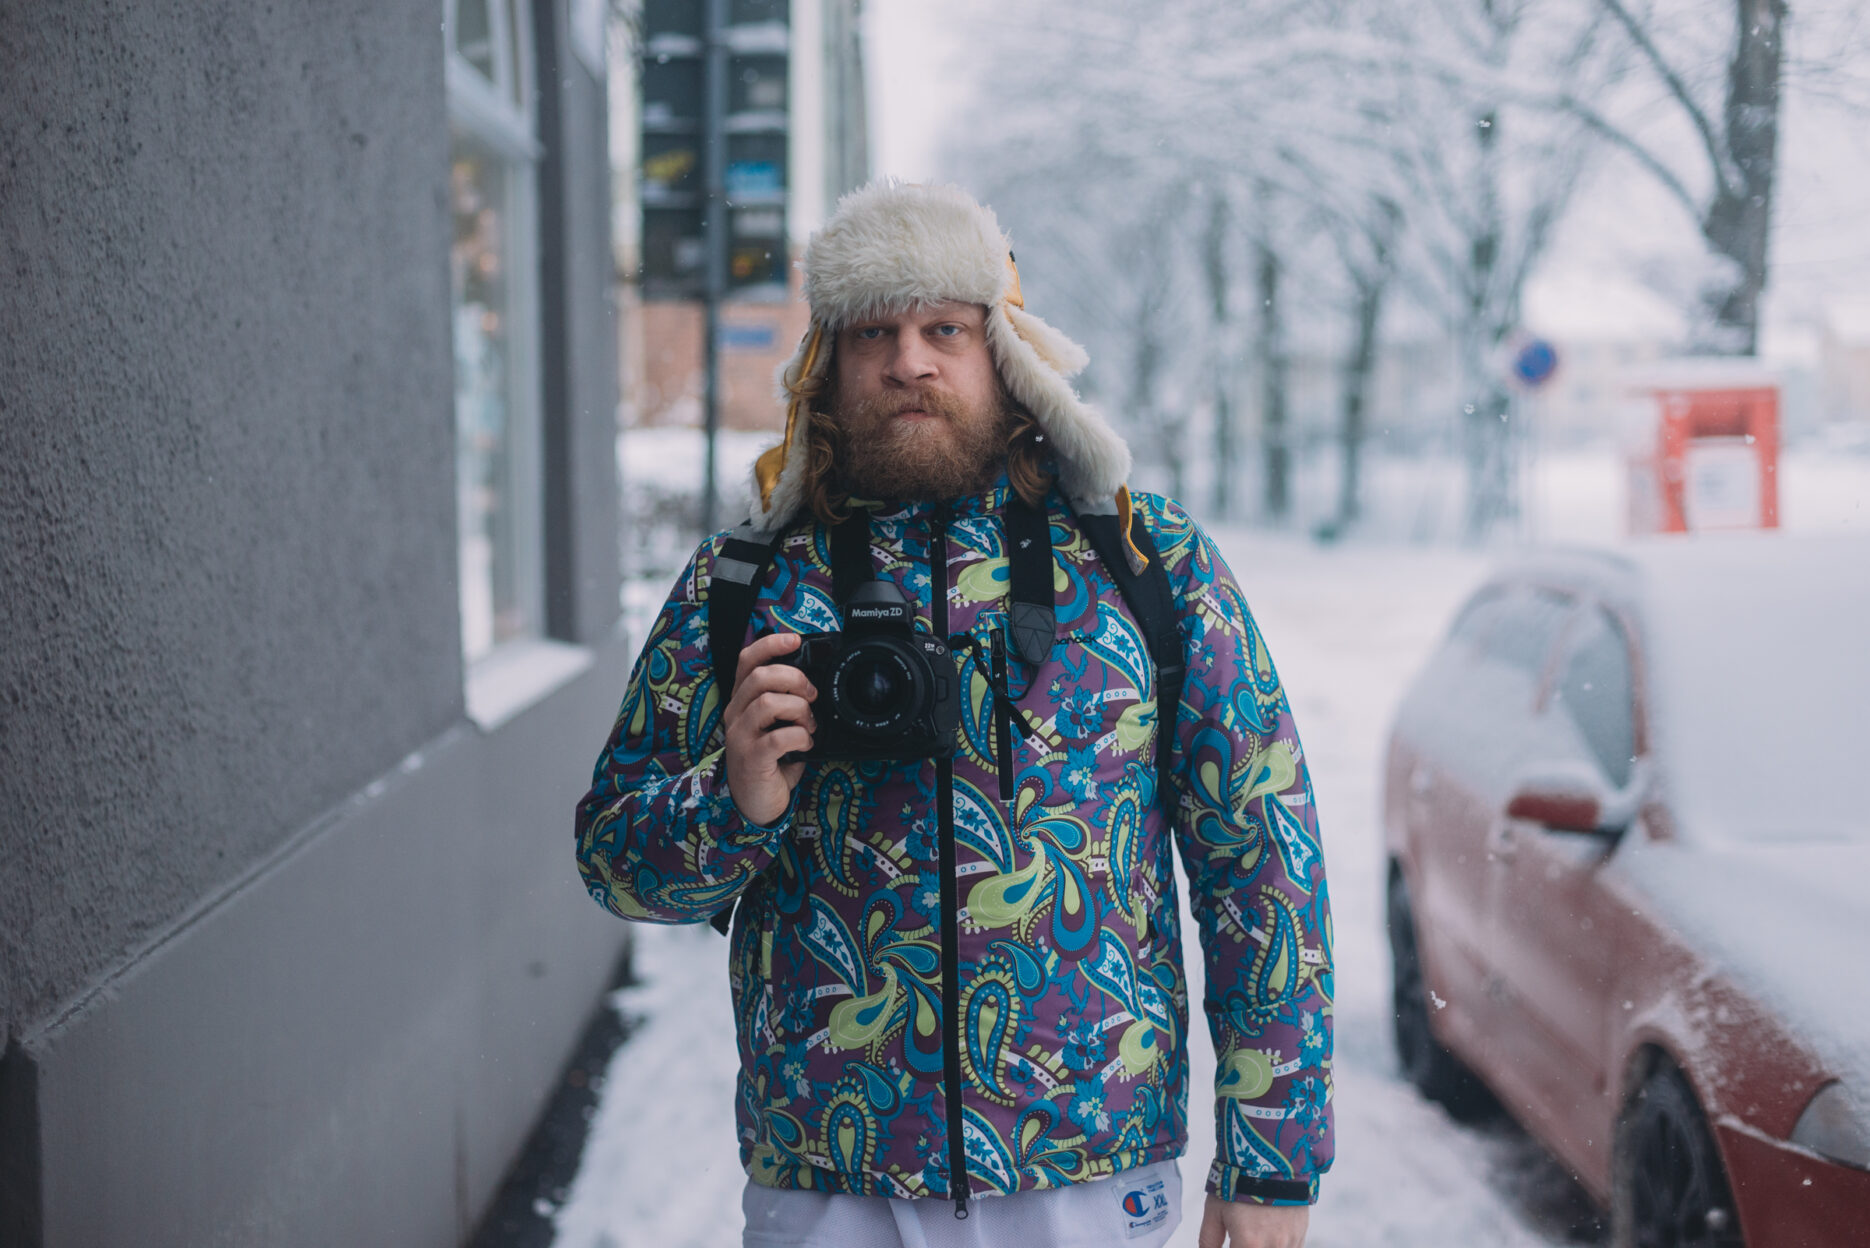 Man in winter clothing standing on snowy street